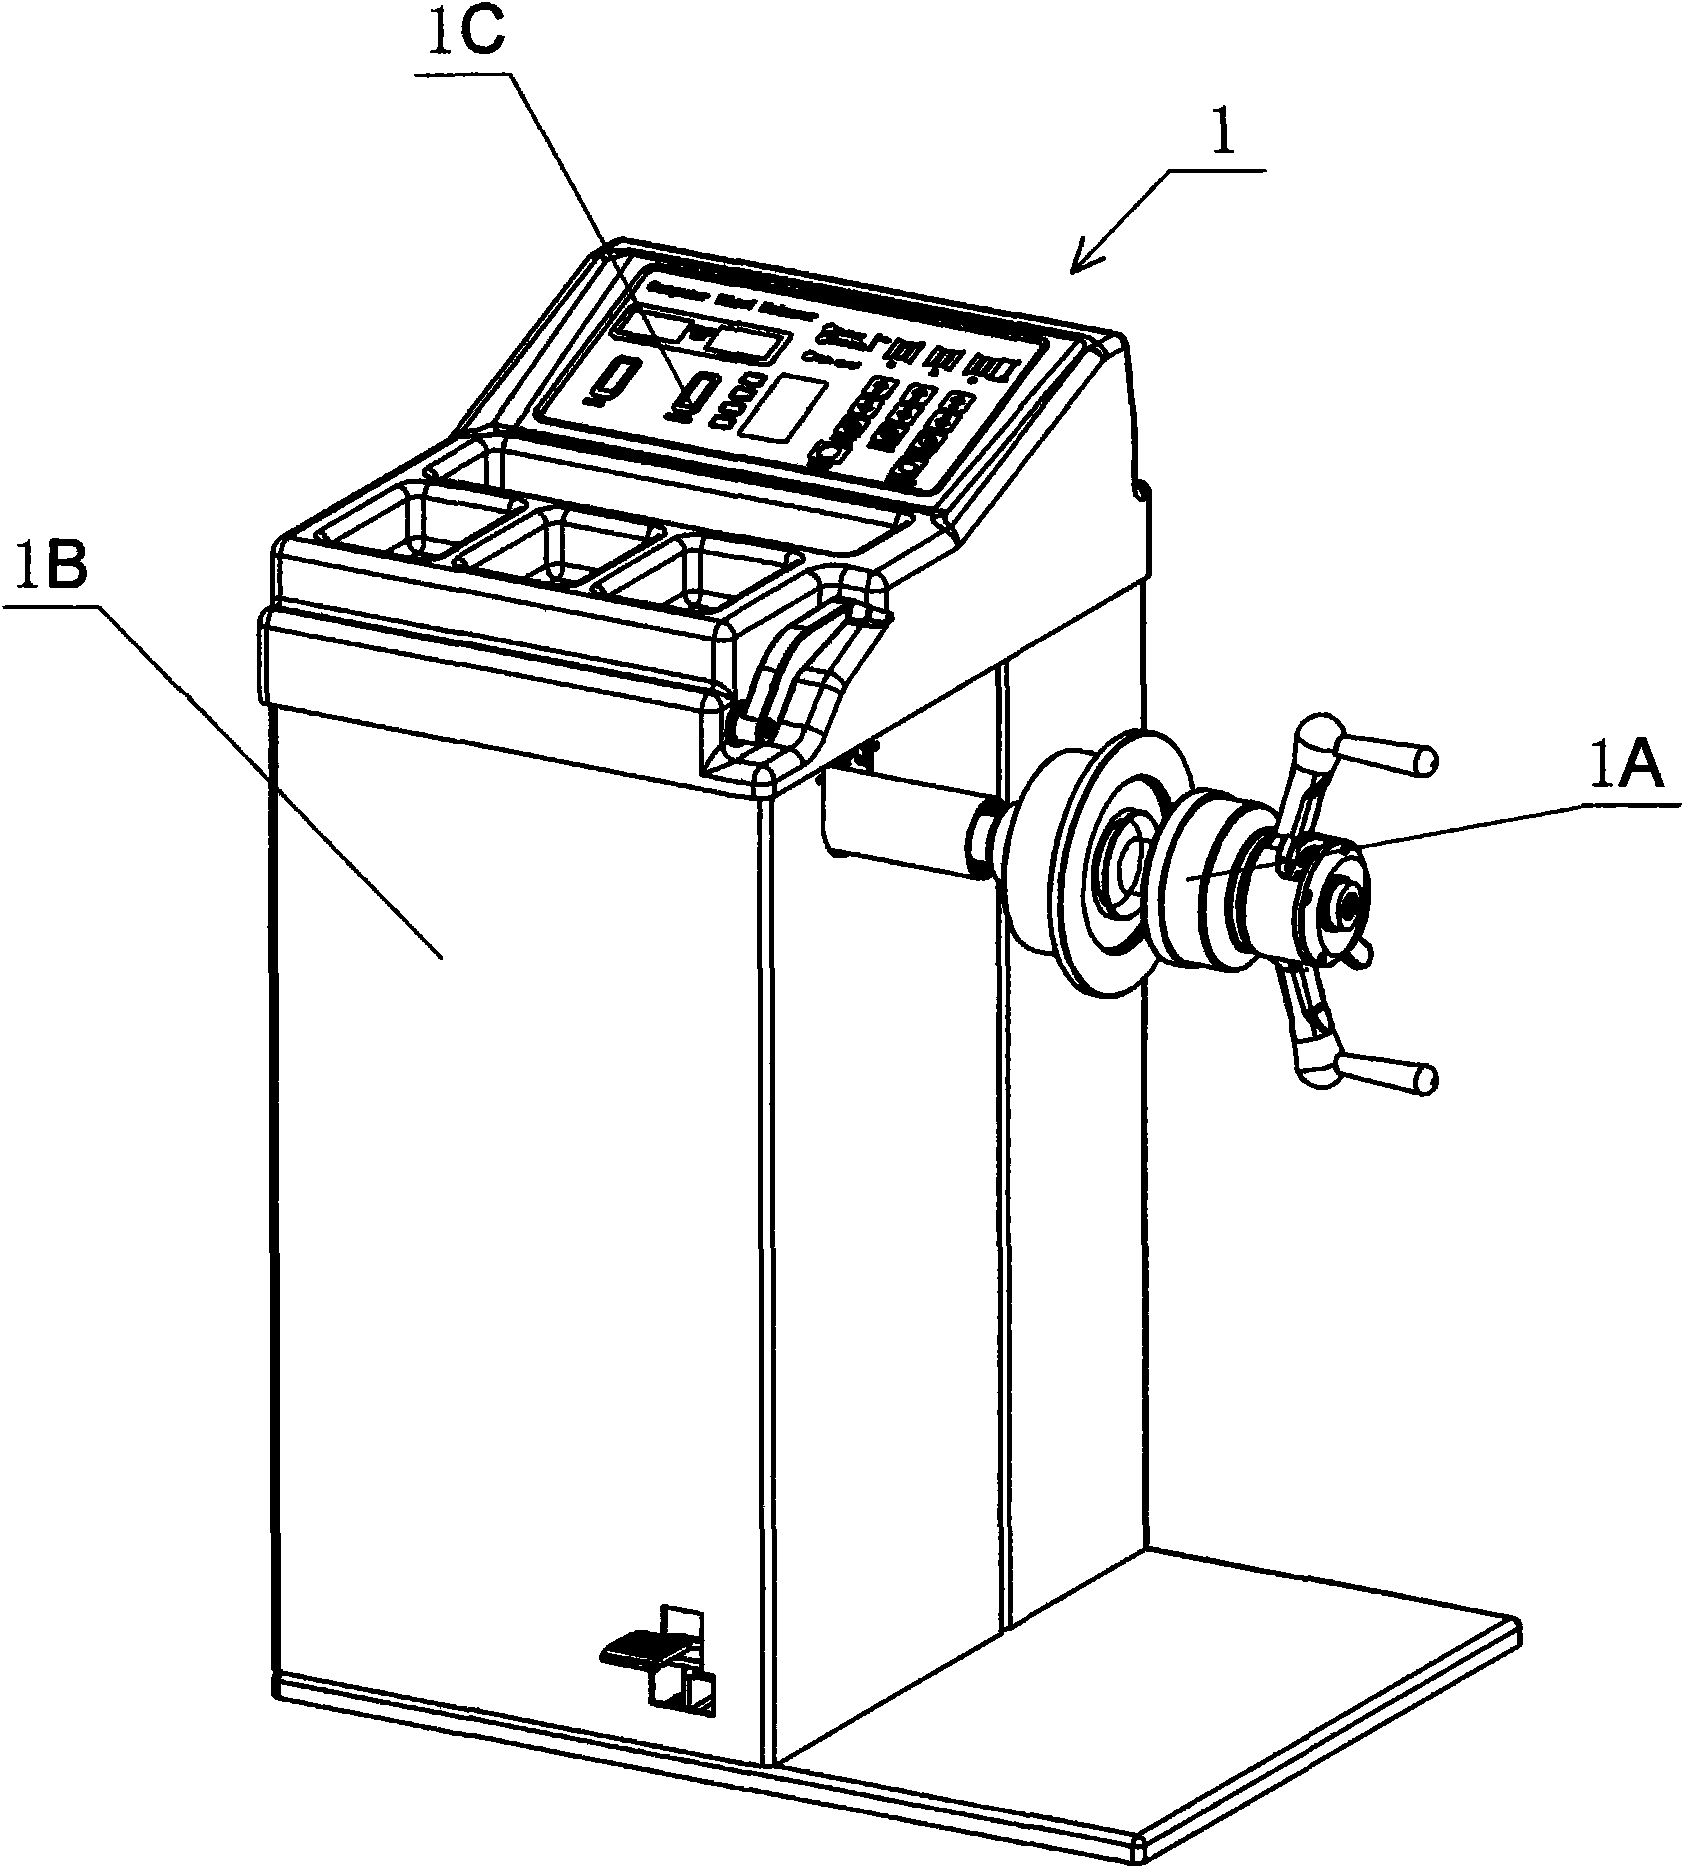 Combined machine for assembly, disassembly and balance tests of tires as well as method for manufacturing and using same